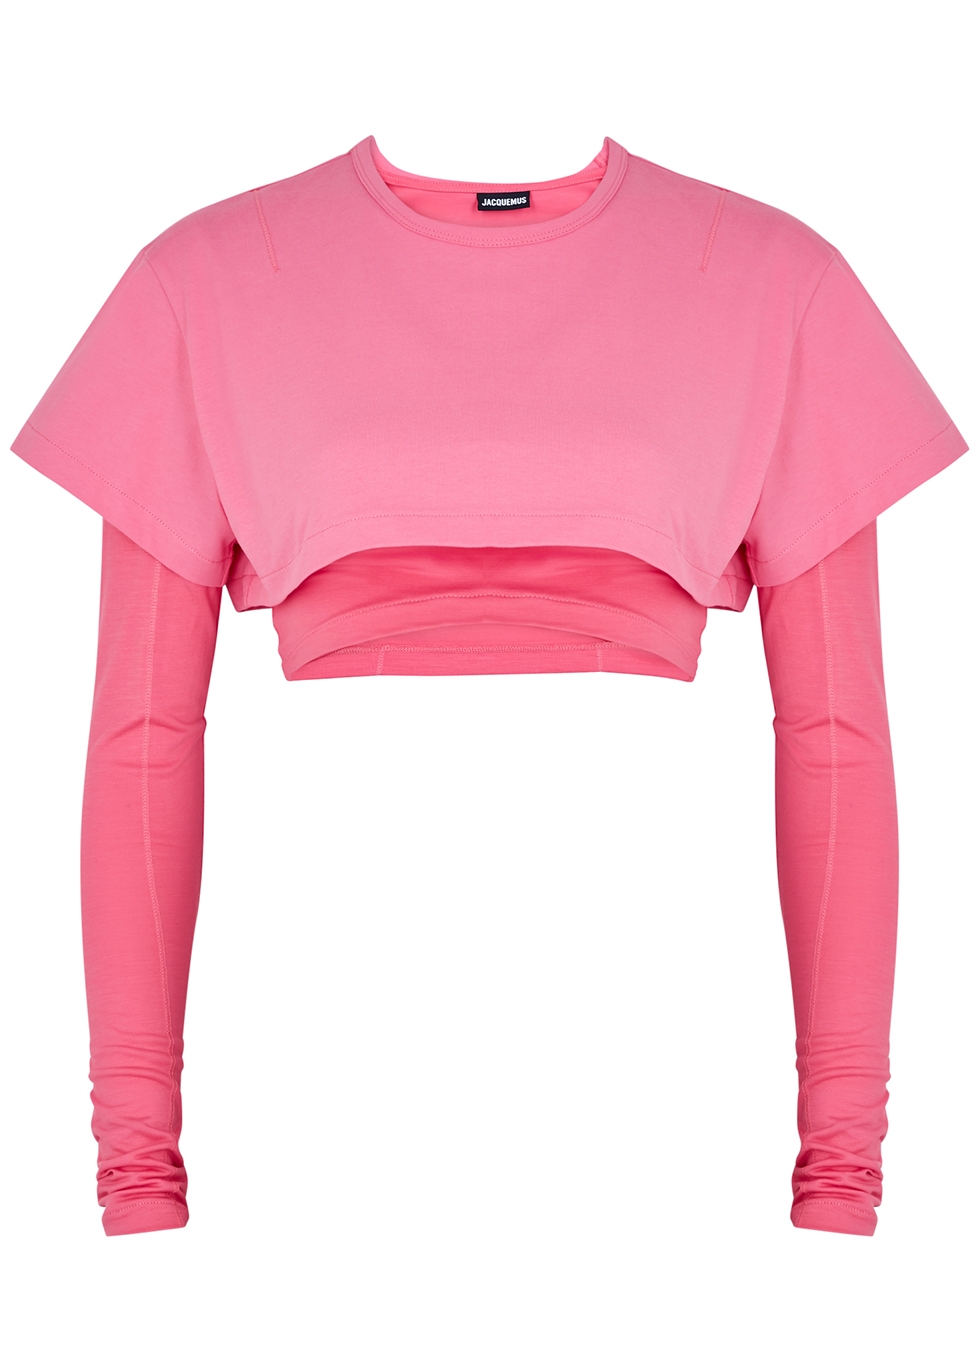 Jacquemus Le Double T-shirt pink layered cotton top